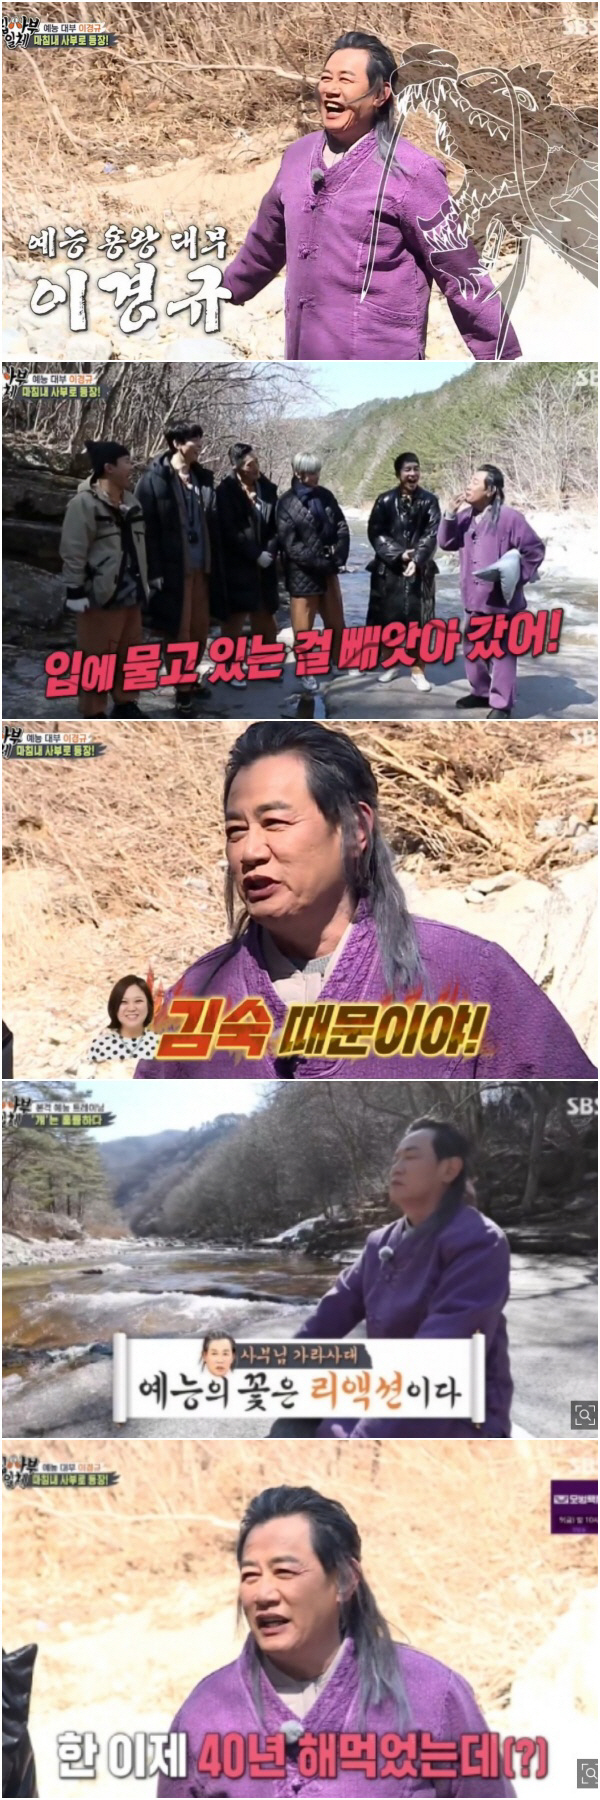 Entertainment The Godfather appeared on All The Butlers.In the SBS entertainment program All The Butlers broadcasted on the 4th, Lee Kyung-kyu appeared as a master and captivated viewers with the entertainment feeling of entertainment The Godfather.Lee Kyung-kyu, who called All The Butlers members in the mountain valley of Inje, Gangwon Province, said, I will unveil the entertainment 10 years of food.You will be able to eat for 10 years. But soon, I regret that I actually appeared.This is the perfect place to not be cursed. You can hear the story Lee Kyung-kyu is working hard.If you dont laugh up to this point, its your fault, he said, giving off an extraordinary entertainment force (?) from the start.Asked what he thought when he was working on entertainment, he said, I think about when it will end.When I left work, I thought, I finished later than I thought. How do you get through getting rid of the fun while doing it? Lee Seung-gi asked, referring to the longevity programs Lee Kyung-kyu had done in the past.Lee Kyung-kyu said, If it is not fun, it can be swept away.If you think its over someday and then you have fun, you can do it again. Think youre going to go all five, but dont think youre going to go all the way.Dont give me a deal, he said, giving stone fastball advice.You cant be swayed by private feelings. Will my image be bad or better now? Of course it is.I have to drag the character to the end, he promised to catch the characters one by one to the members of All The Butlers.Lee Kyung-kyu described Chain Reaction as flower of entertainment, saying the most important thing in entertainment is Chain Reaction.Why did the Brave Girls get popular again? Maybe because of the soldiers Chain Reaction. I thought the soldiers would bring them back.The same goes for entertainment: Chain Reaction is the only way the program lives, the members live, and I live.The reason why there are so many cameras here is to catch Chain Reaction. Life is Chain Reaction. But I do not do Chain Reaction well. Instead, I carry a lot of Chain Reaction children. Lee Yoon-seok is good at Chain Reaction.But there are children who do Chain Reaction without soul. They are like booms. Lee Seung-gi, the official entertainer of Kang Ho-dong, said, Master Lee Kyung-kyu is the master of my entertainment master.But they are so different. All the concepts I knew were overturned. 